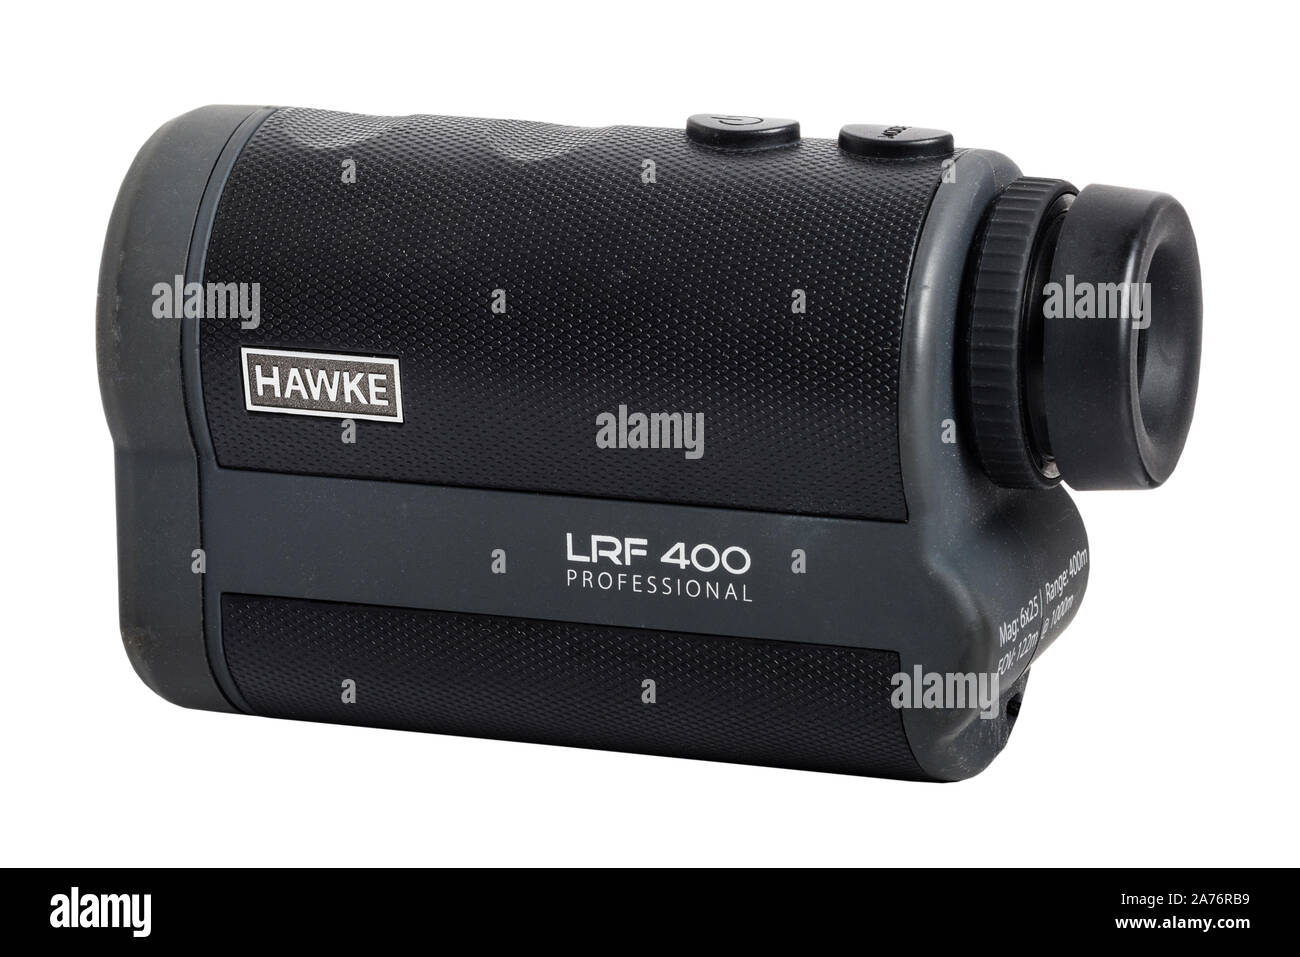 A Hawke LRF 400 rangefinder for measuring distances up to 400 metres on a white background Stock Photo